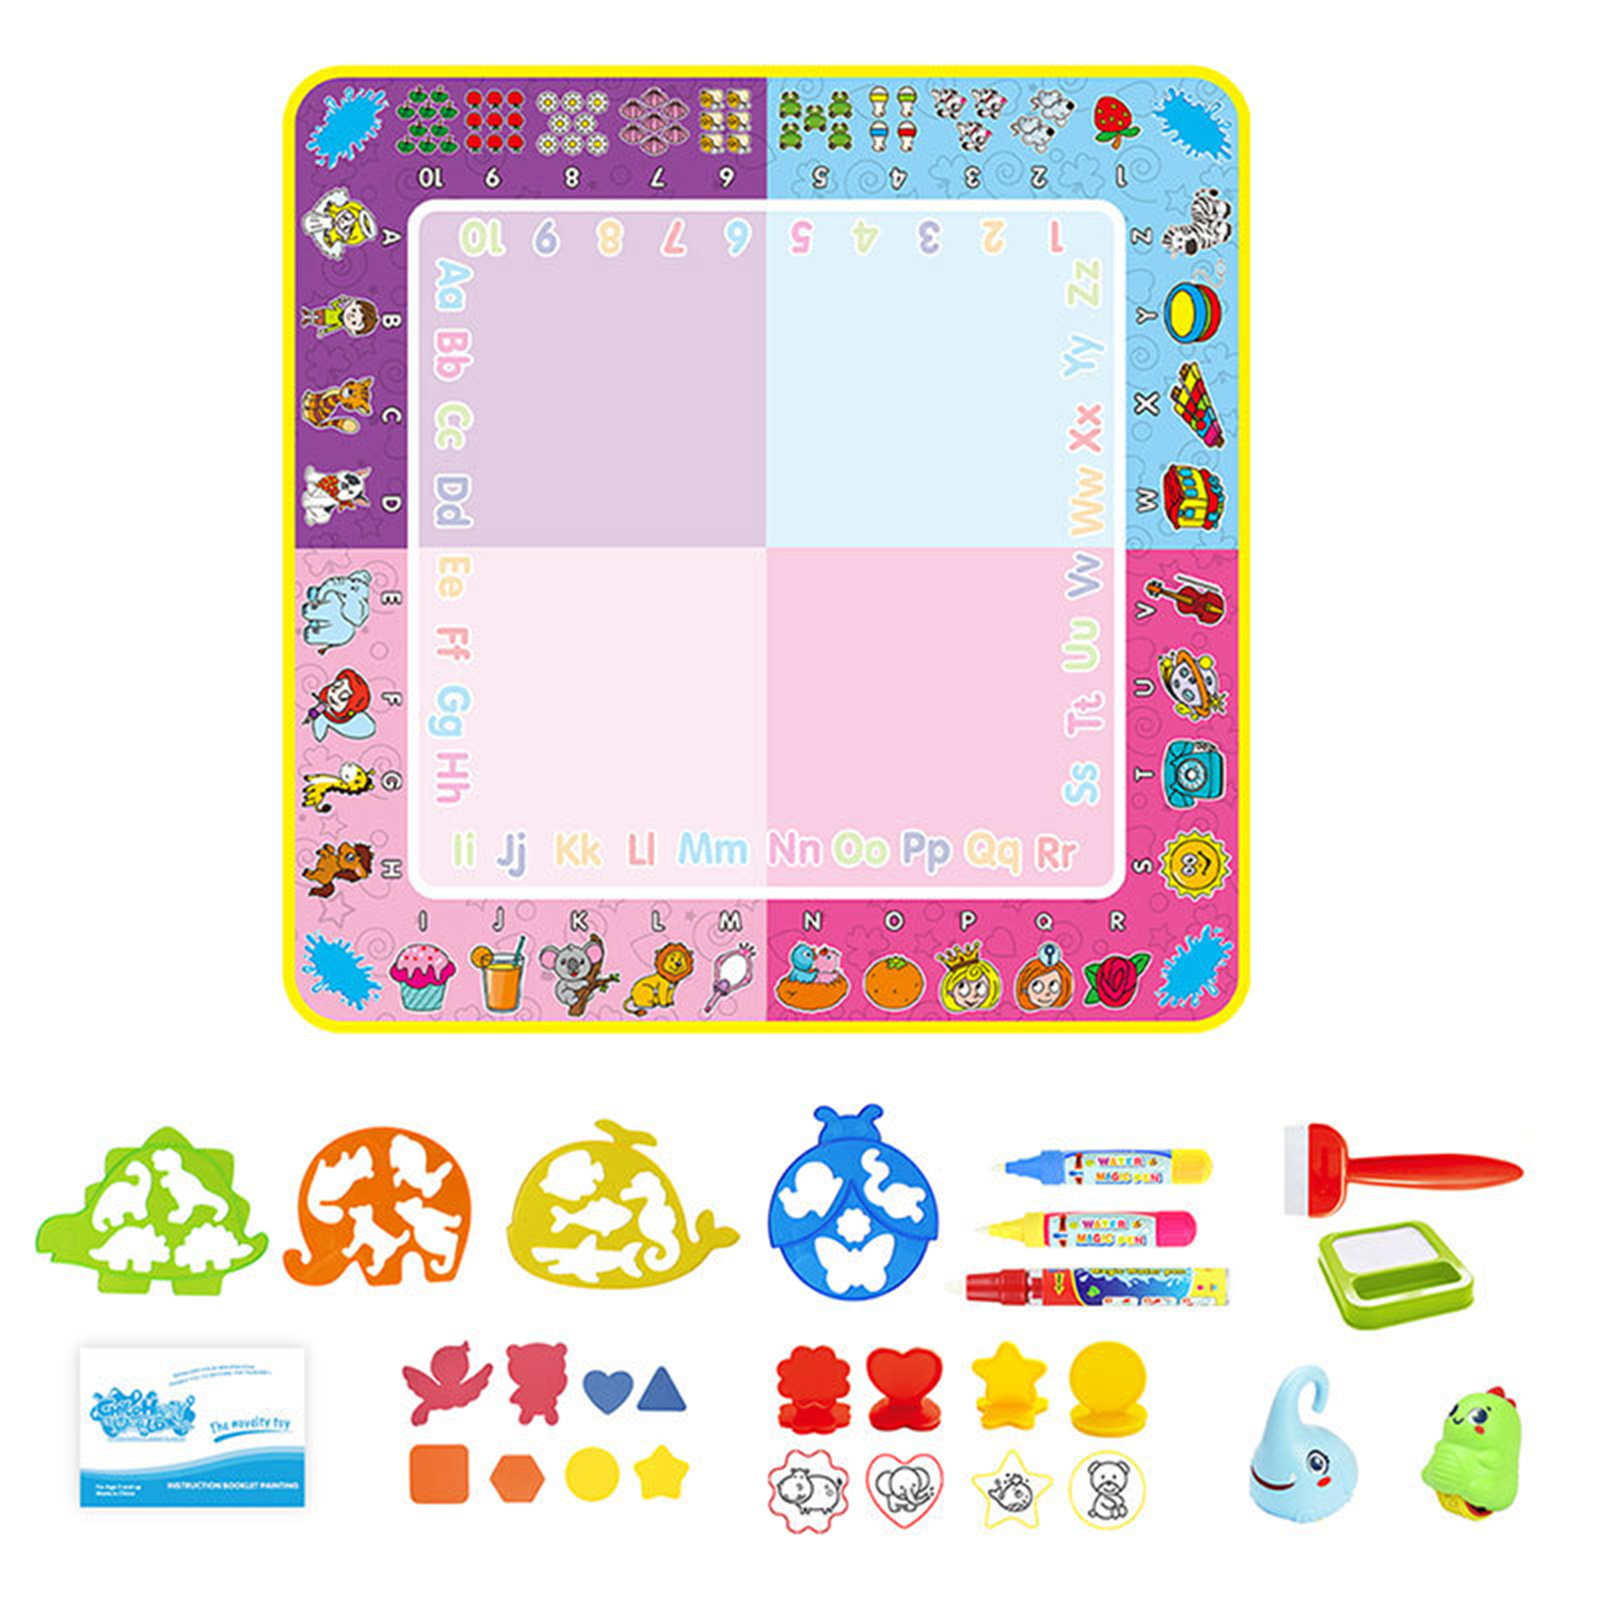 Water Doodle Mat For Kids Coloring Doodle Mat With Magic Pen Painting Board Educational Toys For Boys Girls Gifts CP4947 78 x 78cm